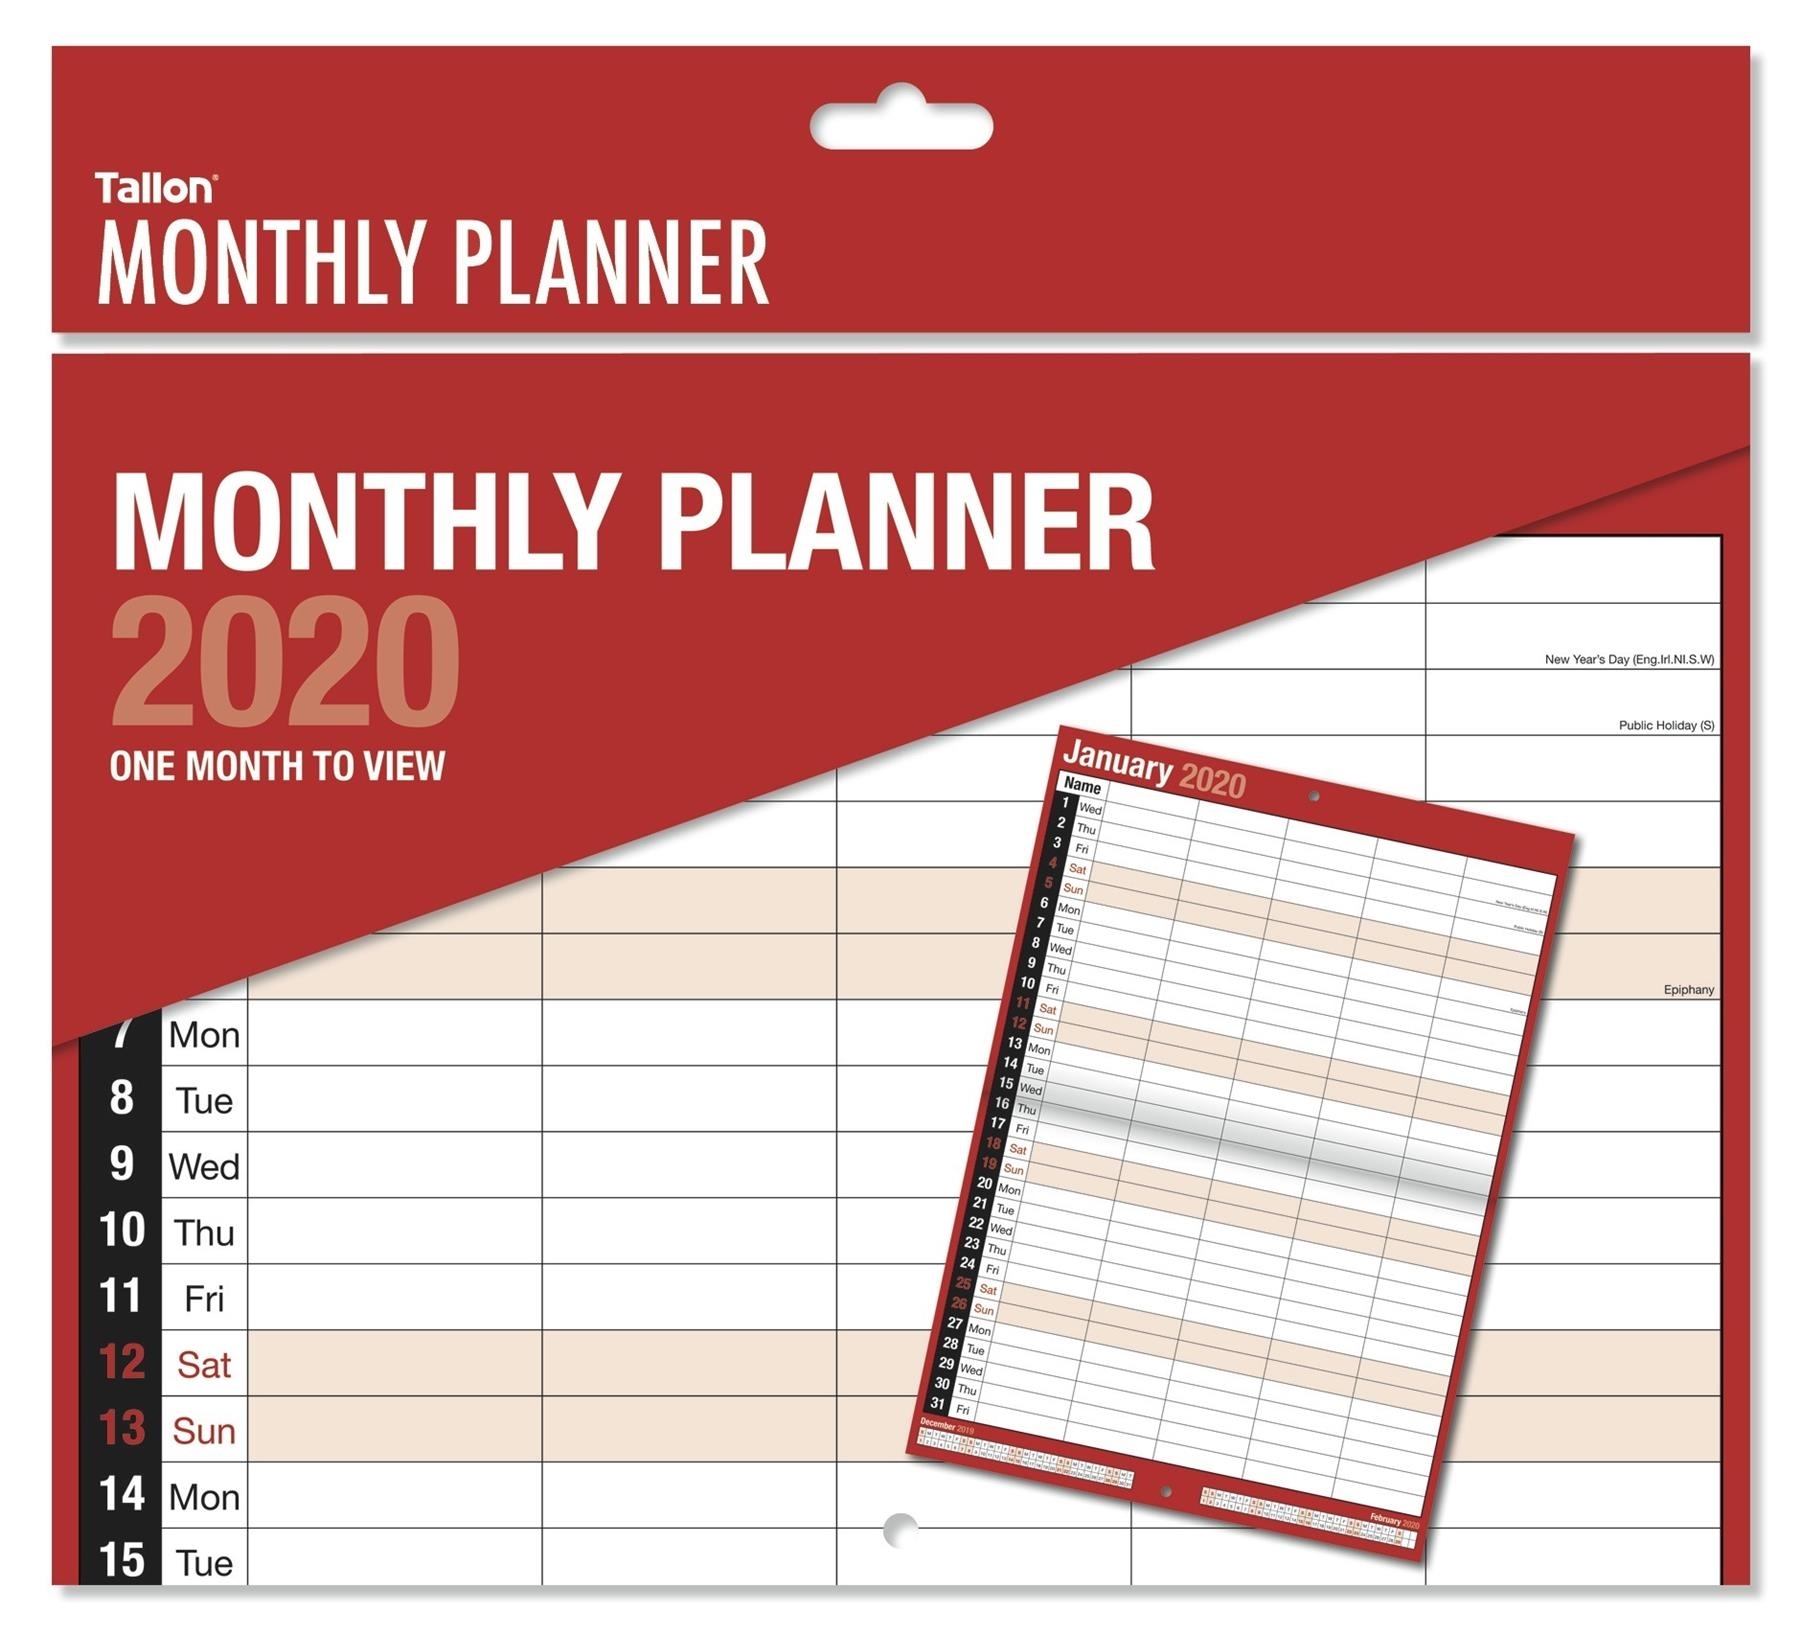 Details About 2020 Monthly Planner Month To View Large Wall Hanging  Calendar 5 Column Tal-3813